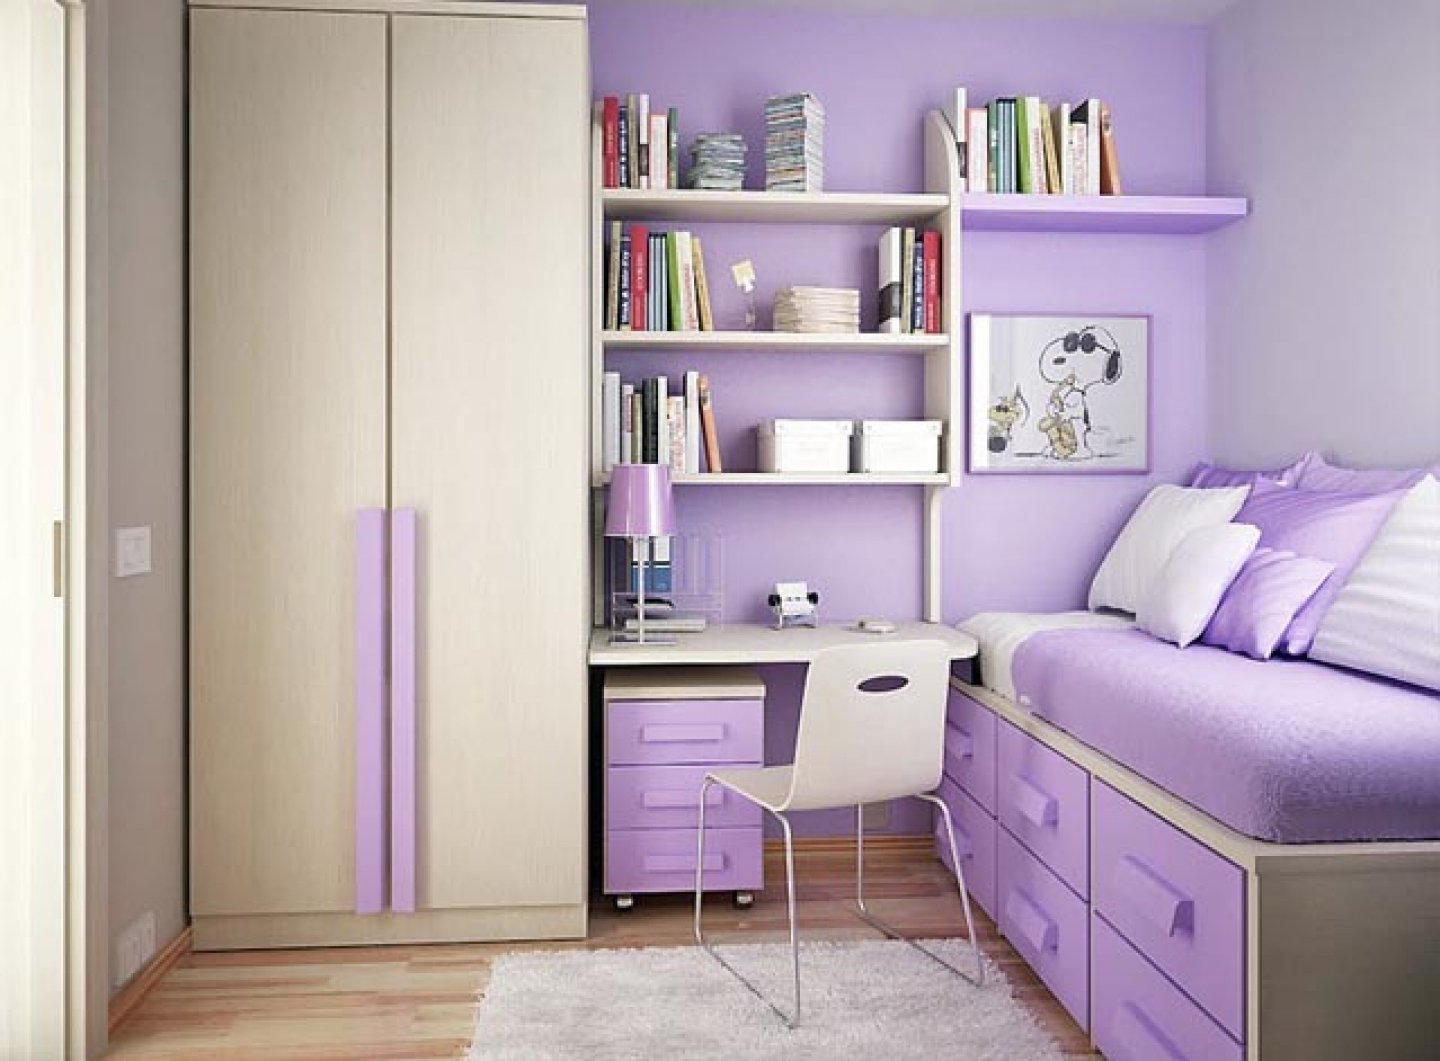 Girl Bedroom Ideas For Small Rooms